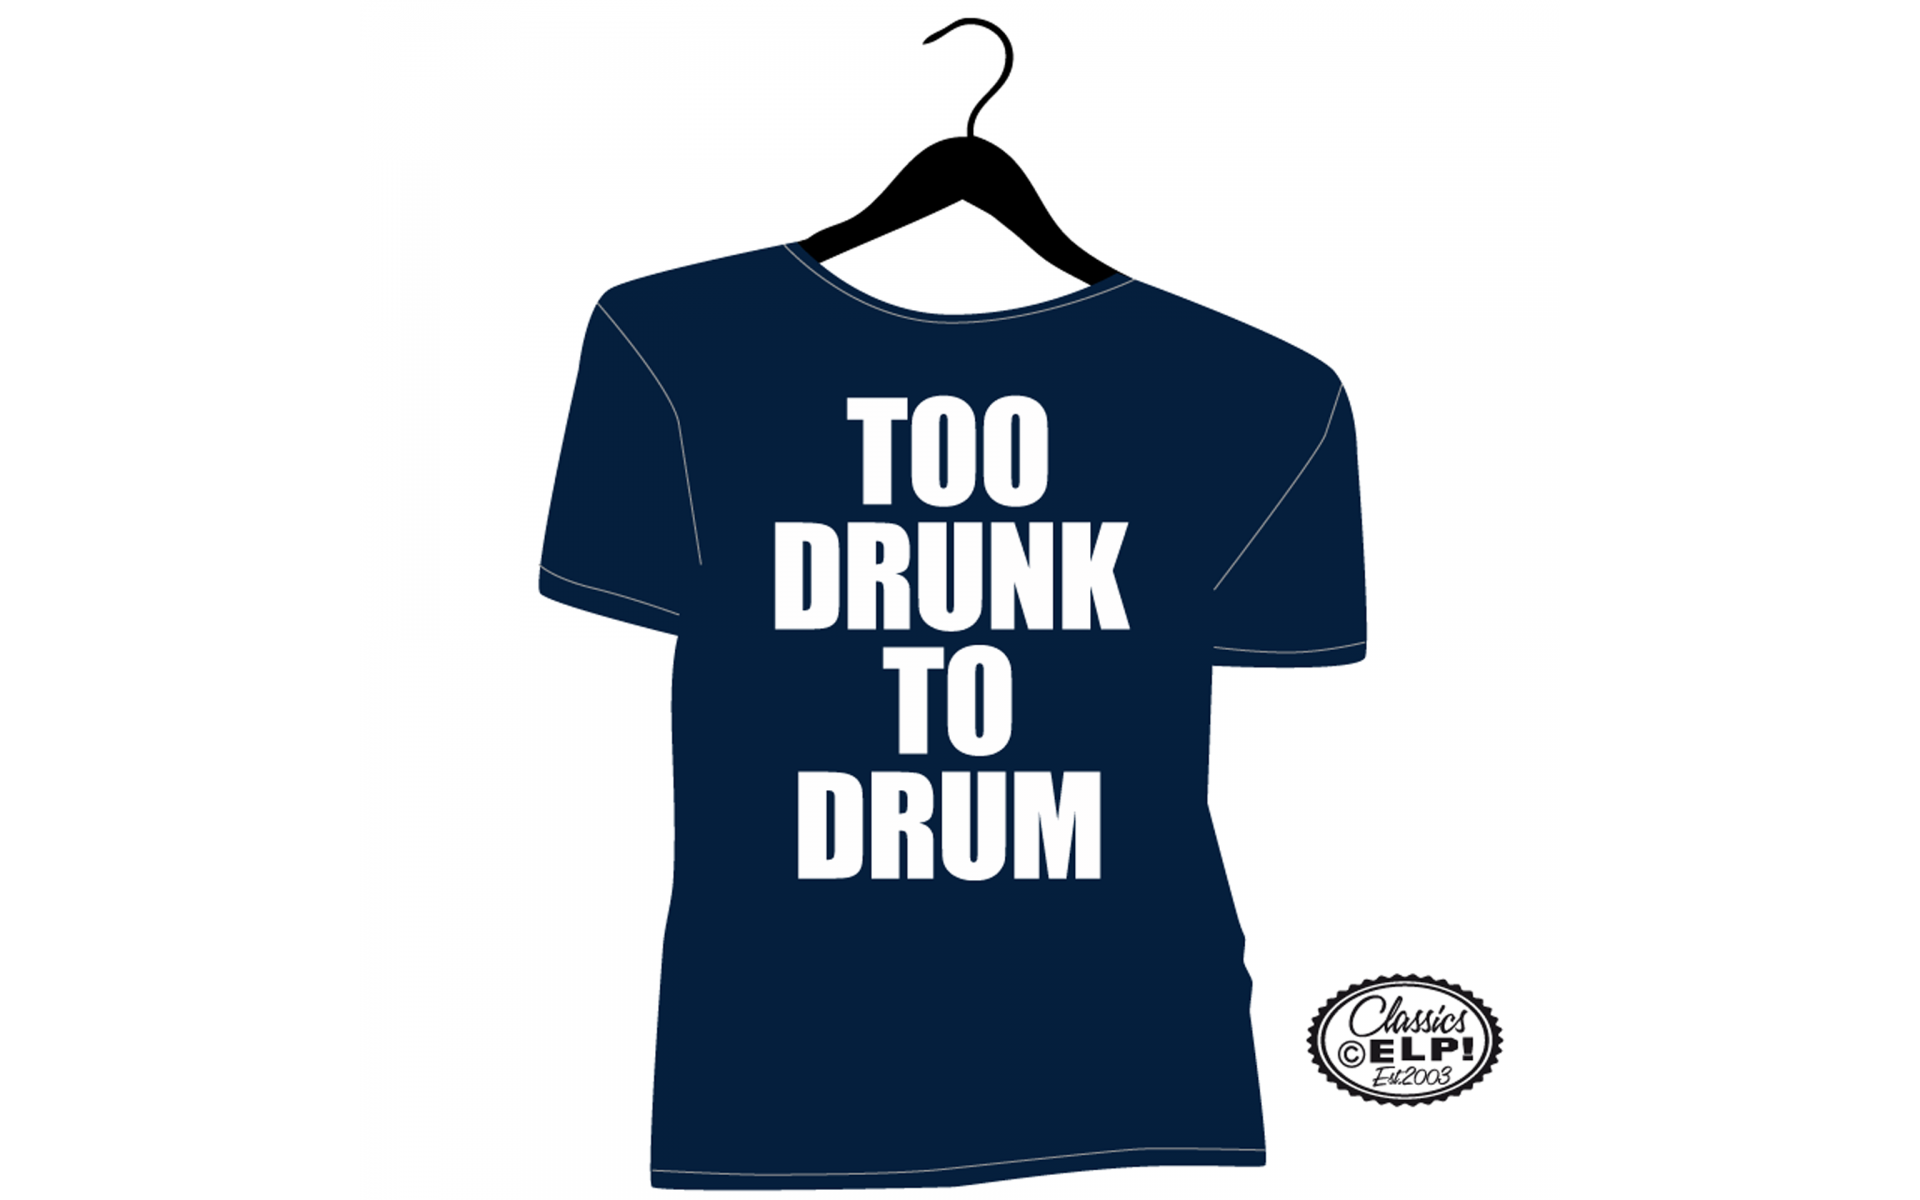 Too drunk to drum